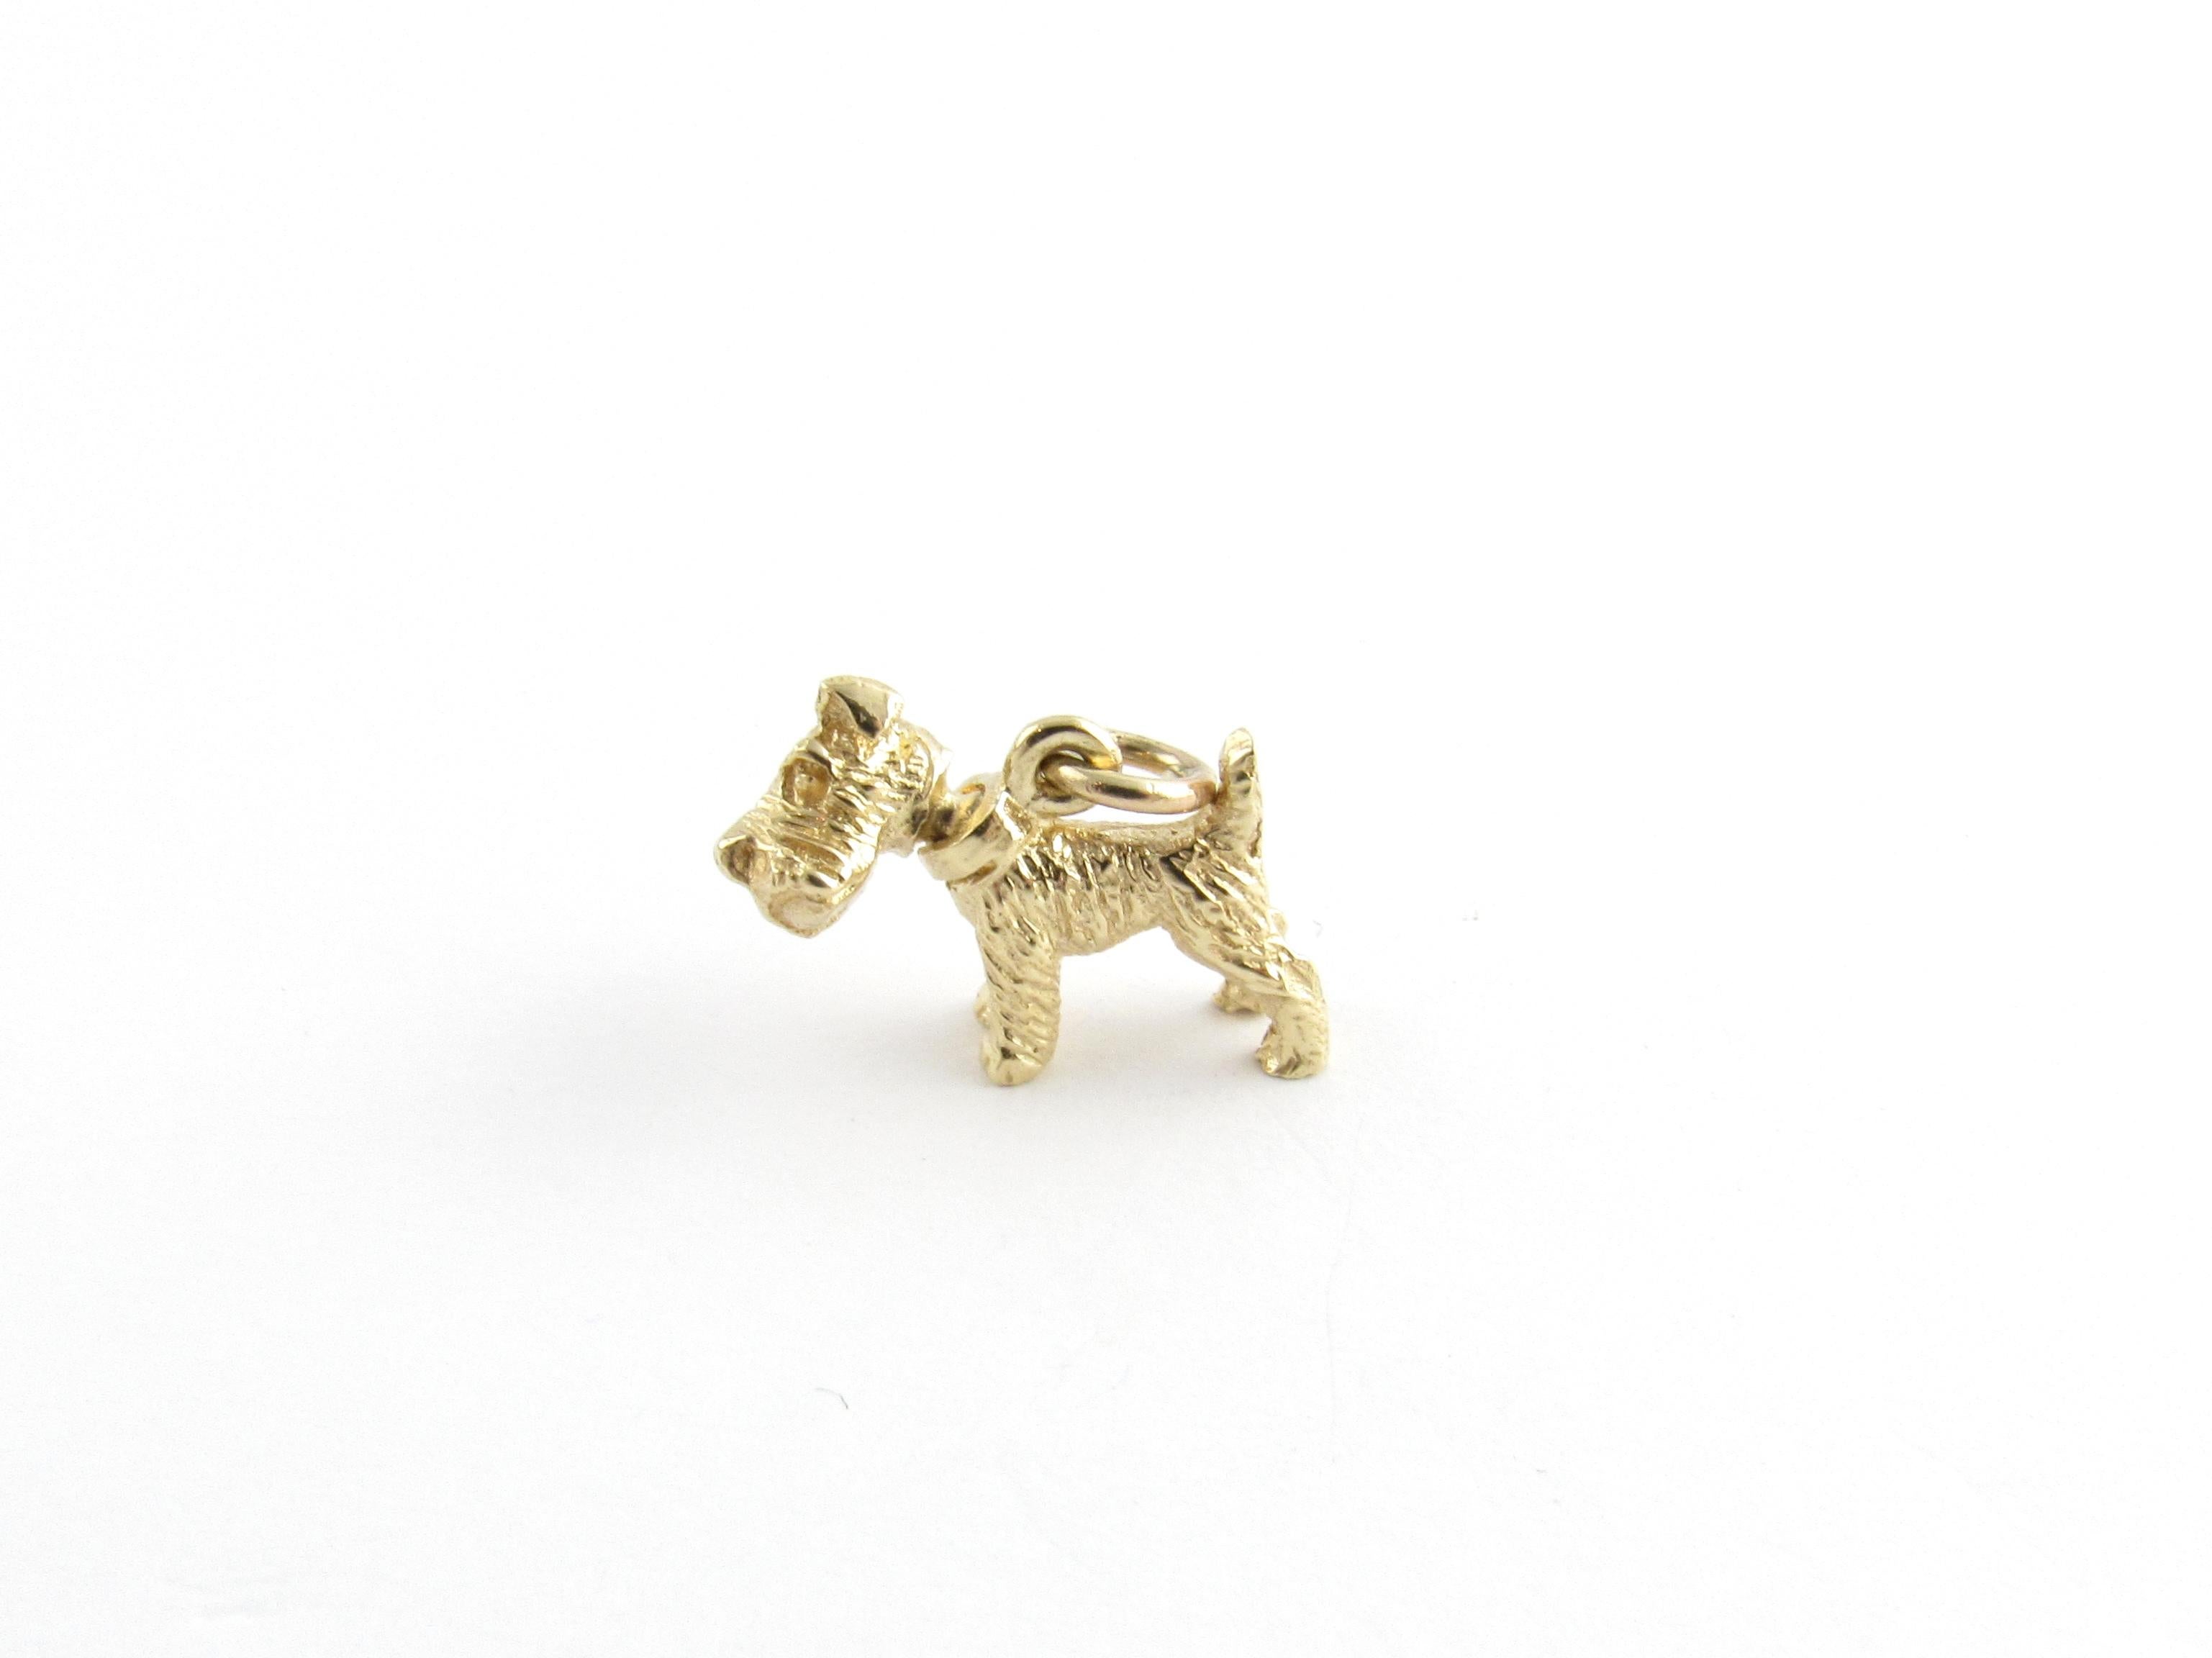 Vintage 14 Karat Yellow Gold Schnauzer Dog Charm

Man's best friend!

This beautifully crafted charm features a lovable schnauzer dog meticulously detailed in 14K yellow gold.

Size: 15 mm x 15 mm

Weight: 1.9 dwt. / 3.0 gr.

Tested for 14K